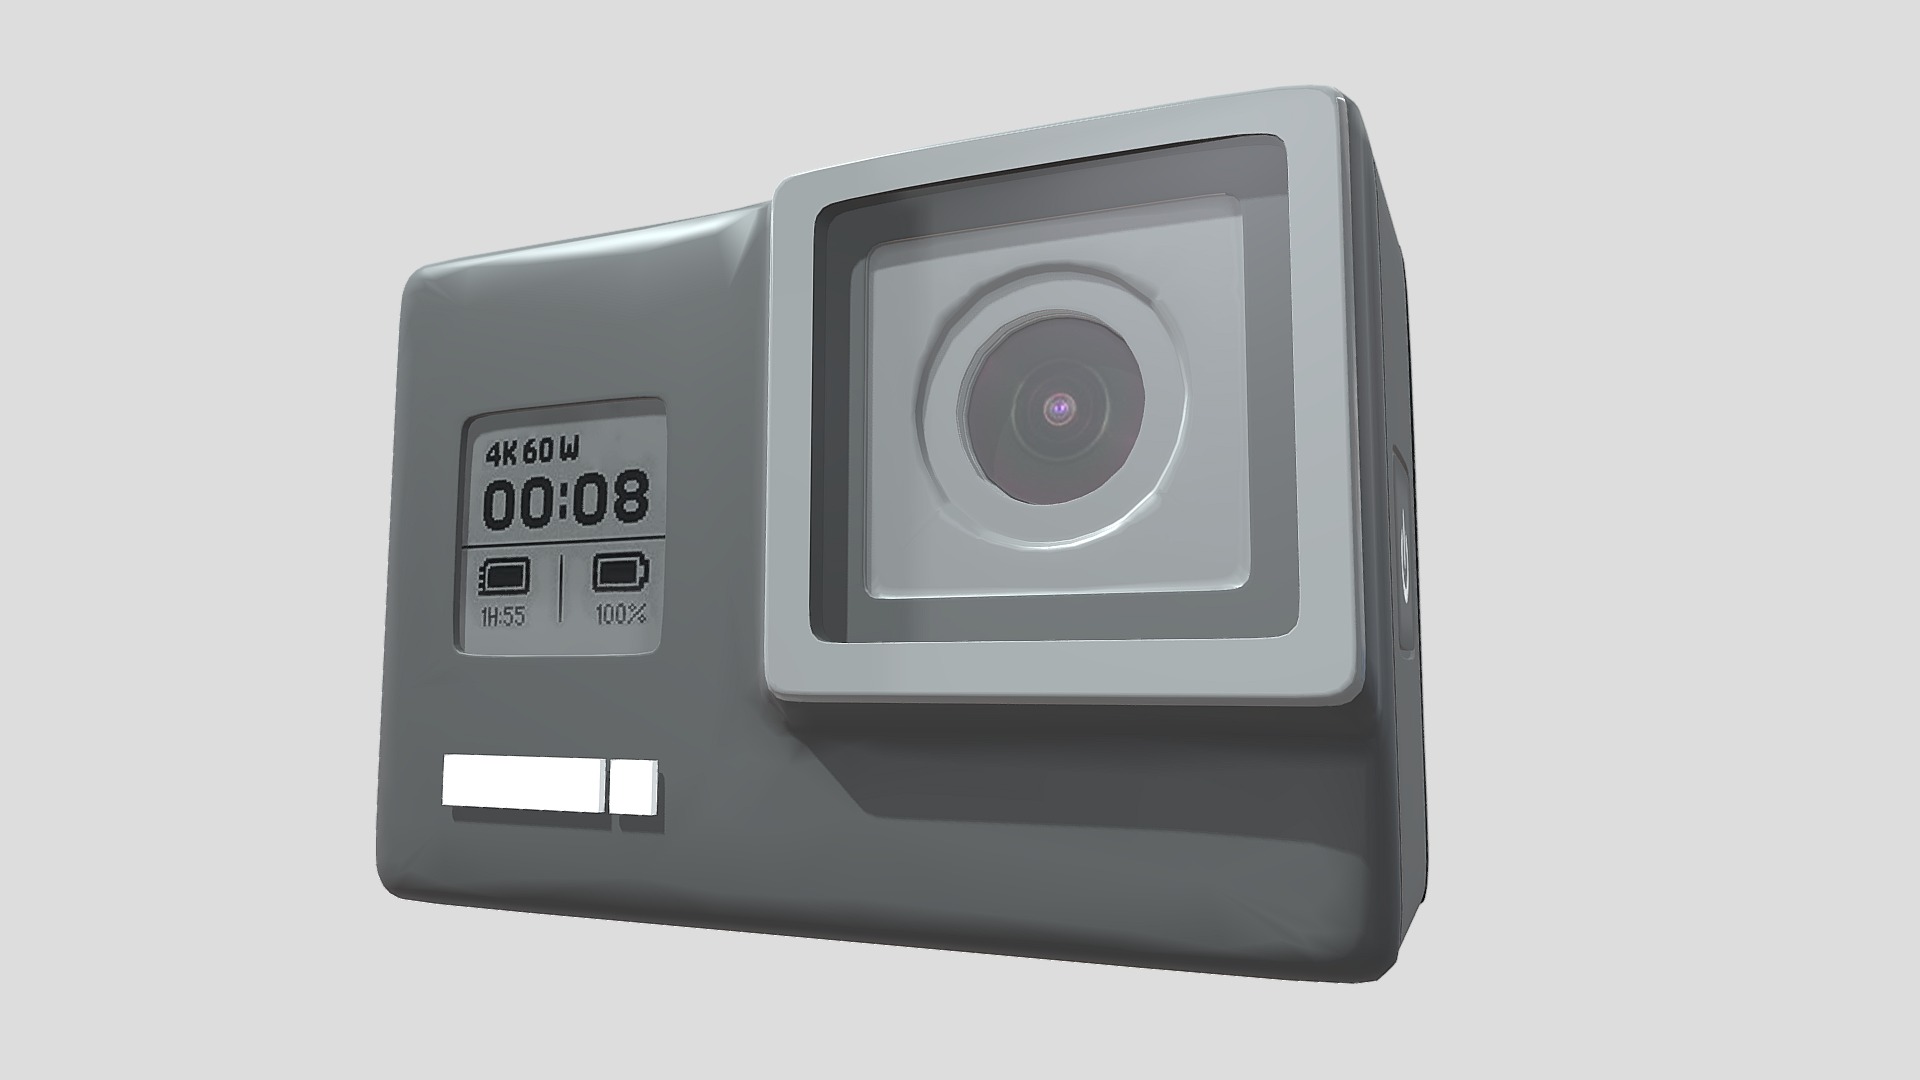 3D model GoPro camera - This is a 3D model of the GoPro camera. The 3D model is about a white rectangular object with a screen.